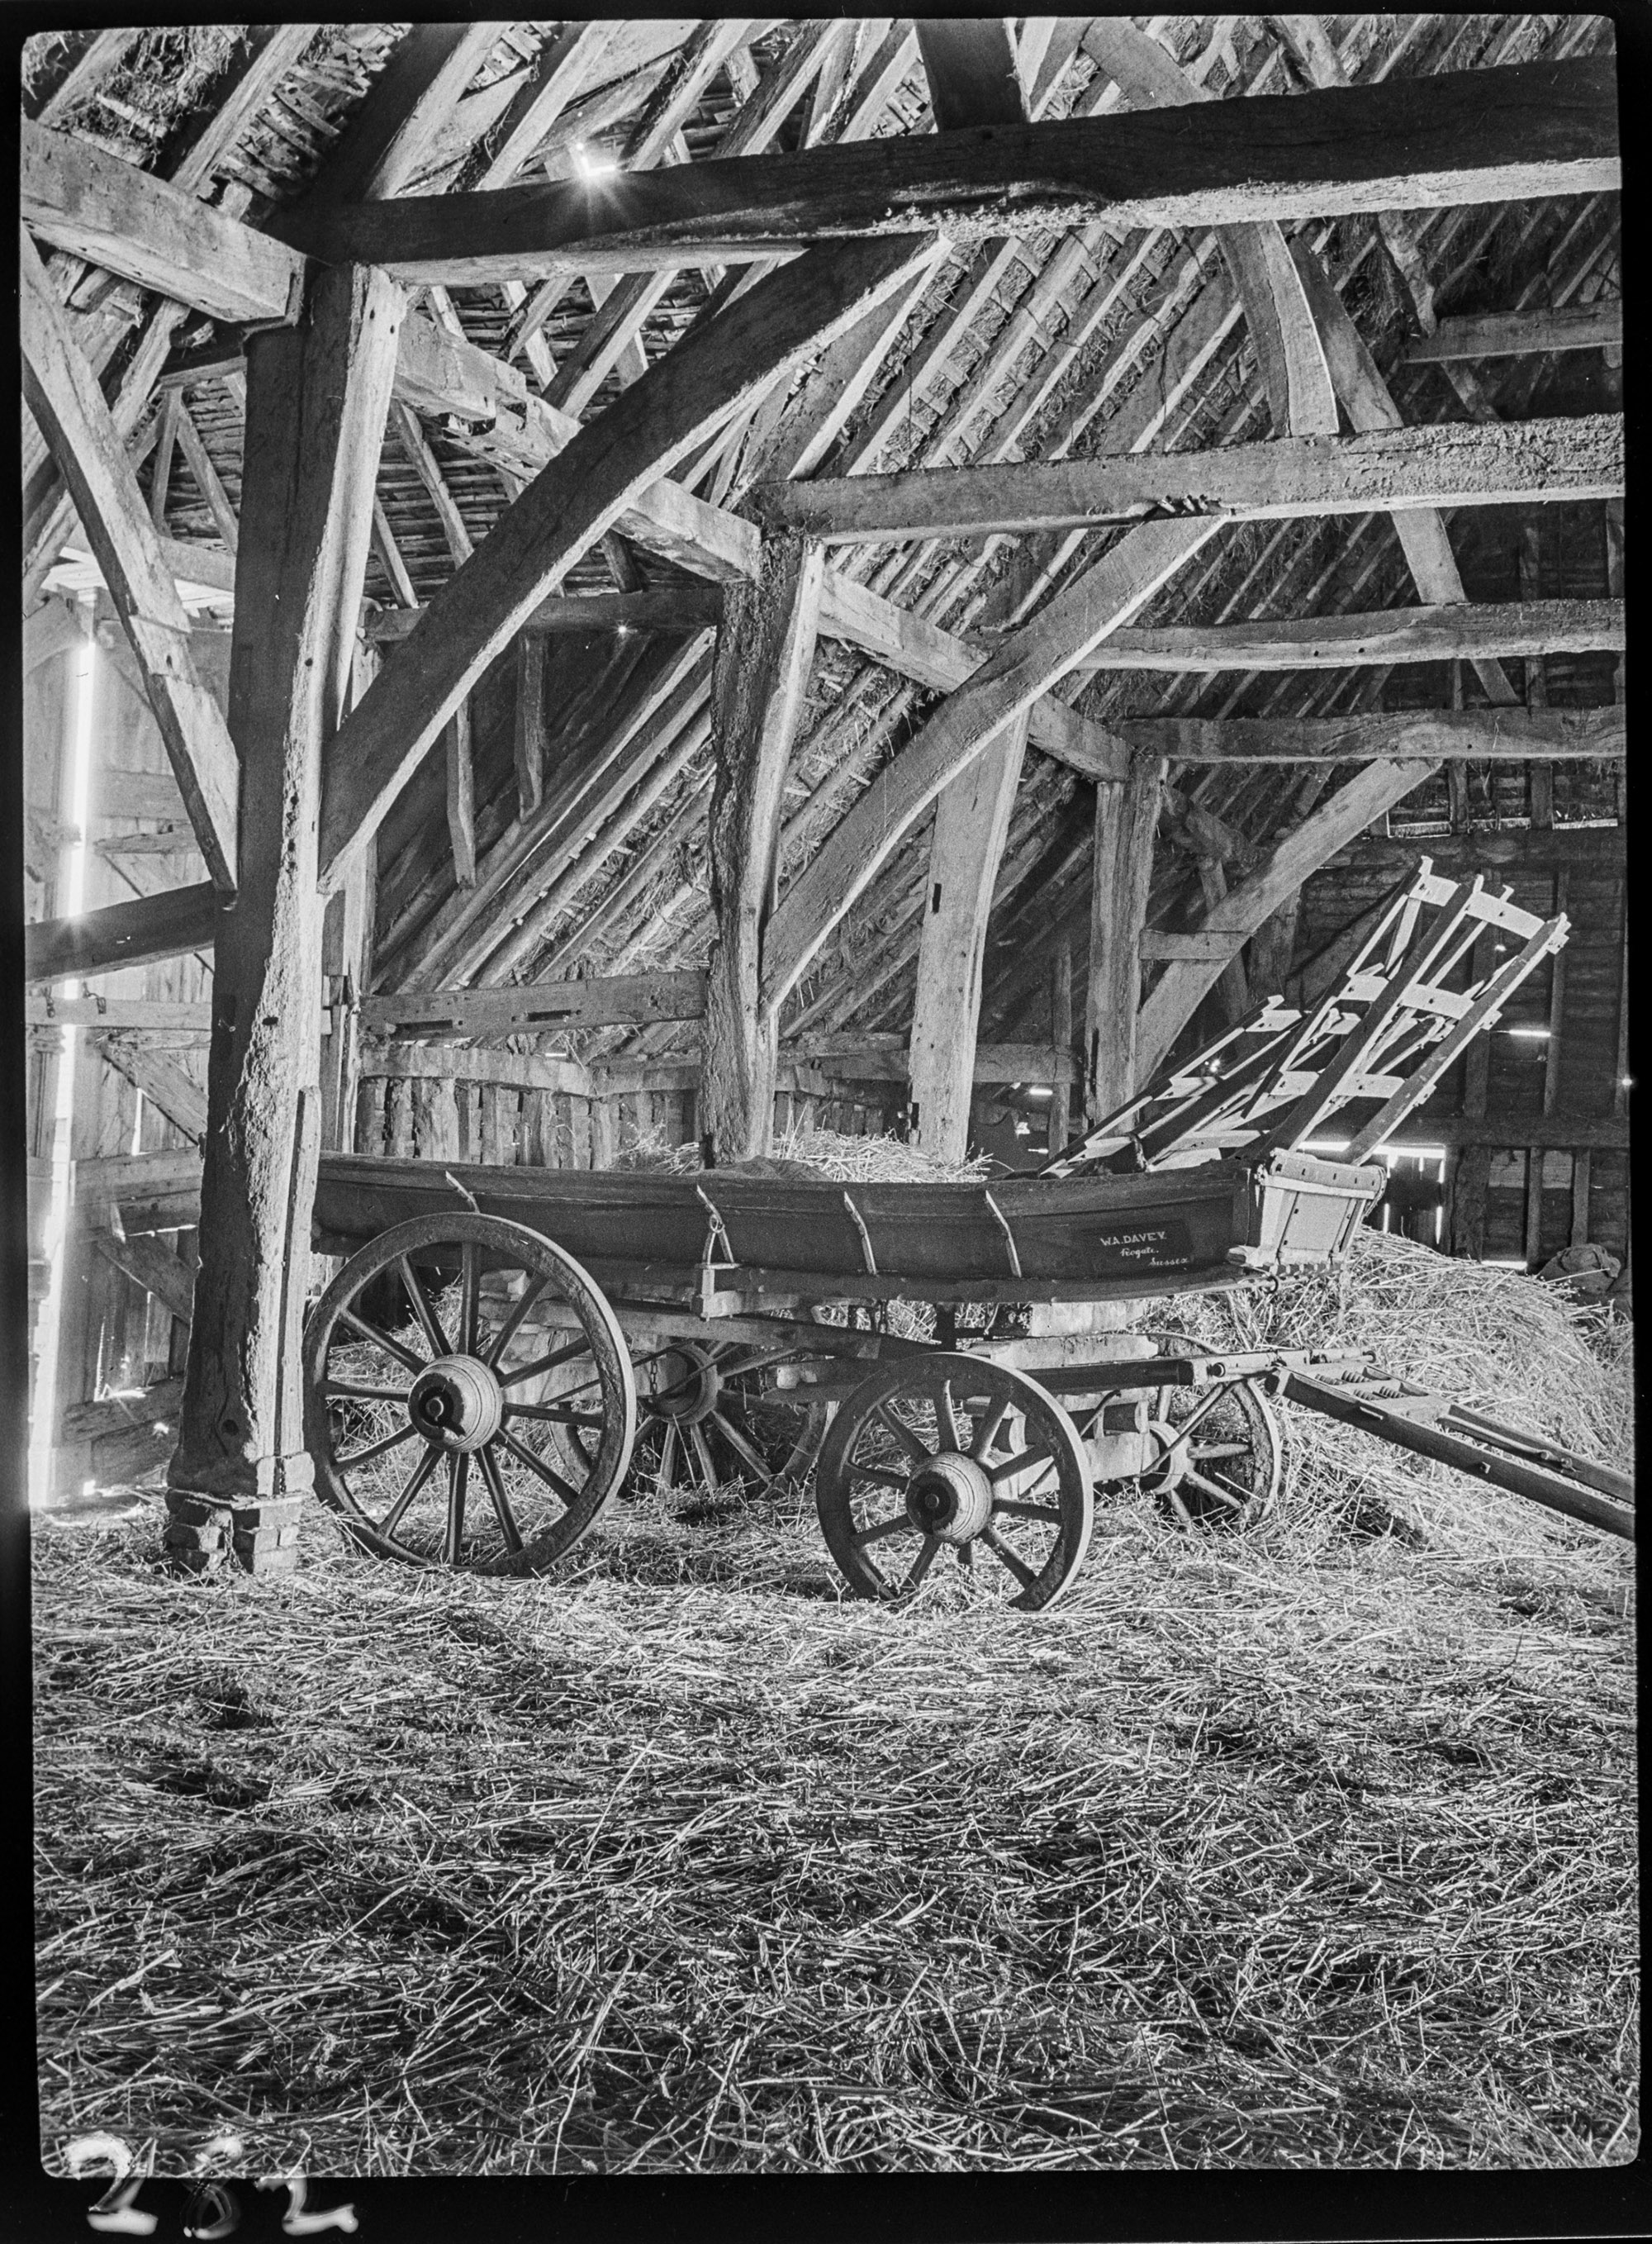 Black and white photograph showing part of the interior of a large agricultural barn constructed with timber trusses. Straw is strewn on the floor of the barn. In the centre of the photograph is a static, wooden cart. A sign on the cart reads: 'W.A. Davey Rogate Sussex'.